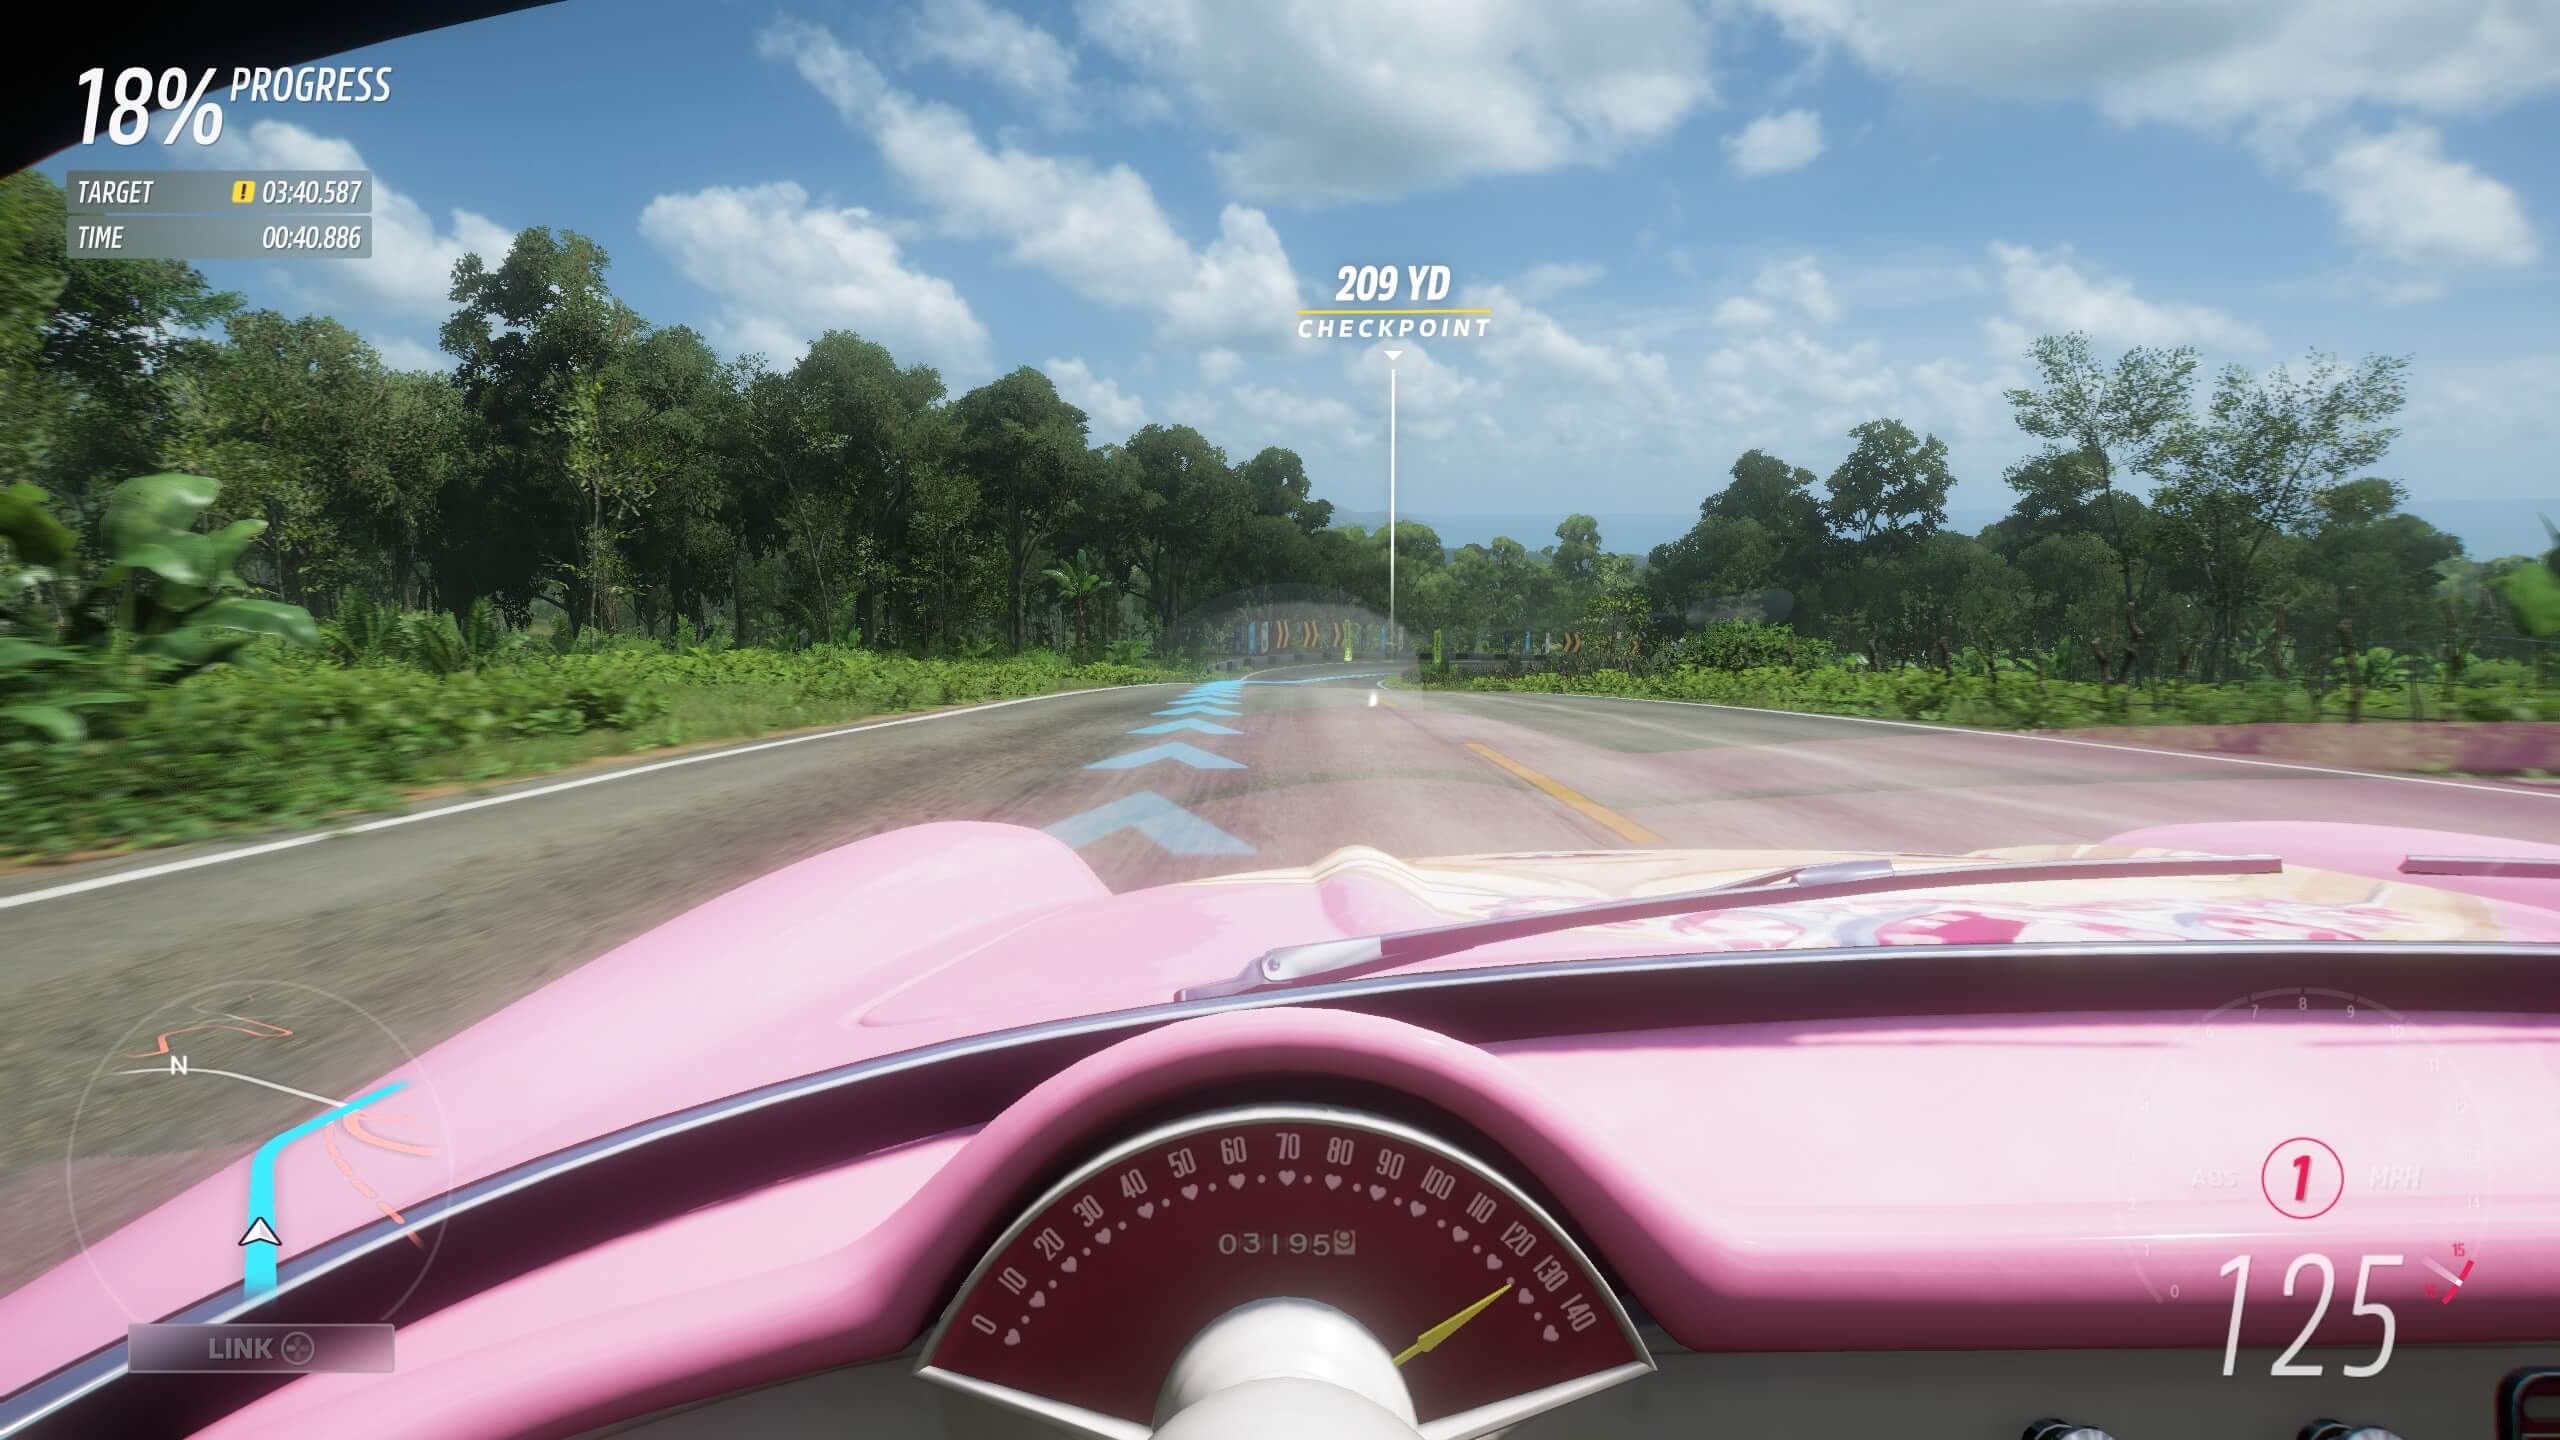 COTW 86: Inside the Barbie Corvette in further zoom